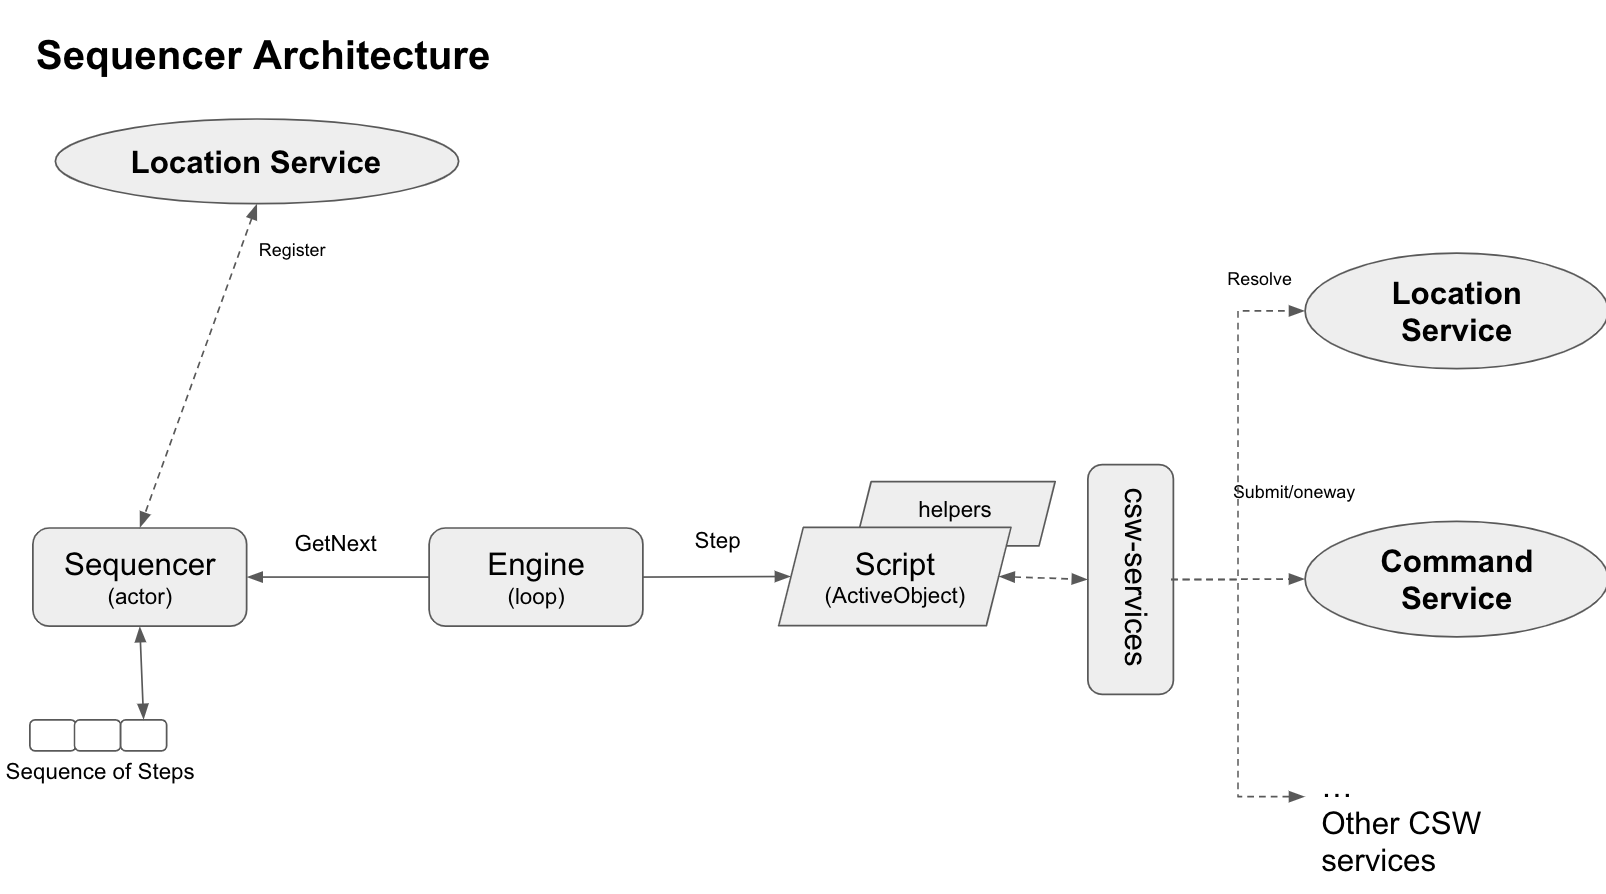 Sequencer Architecture